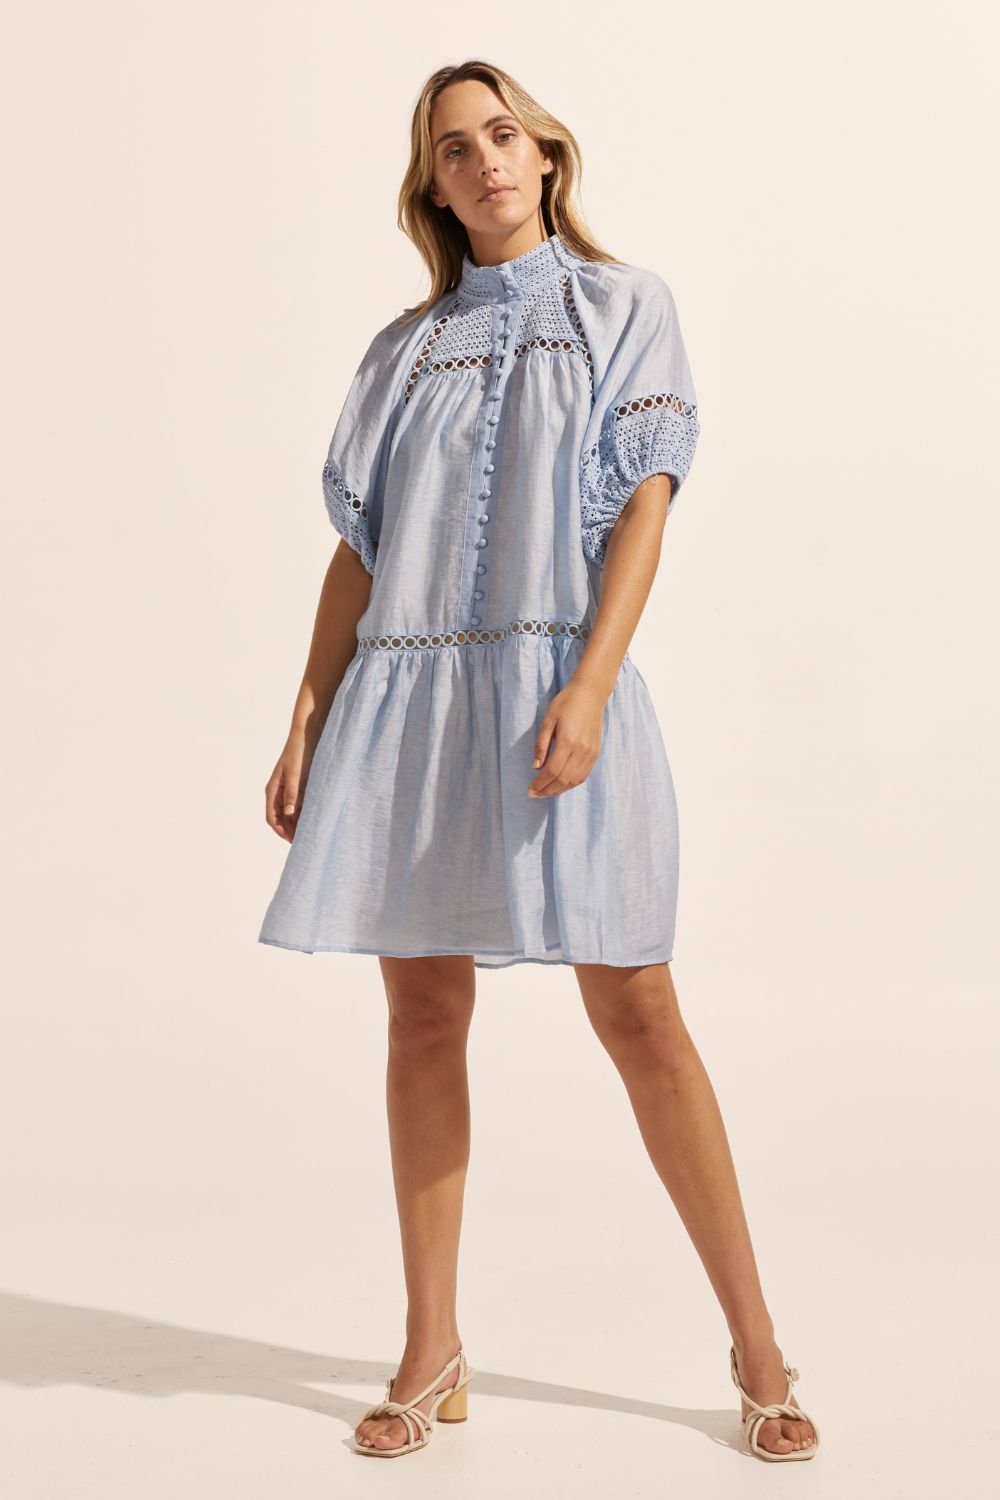 blue, high neck, covered buttons, circular lace detailing, drop waist, mid-length sleeve, mini dress, front image